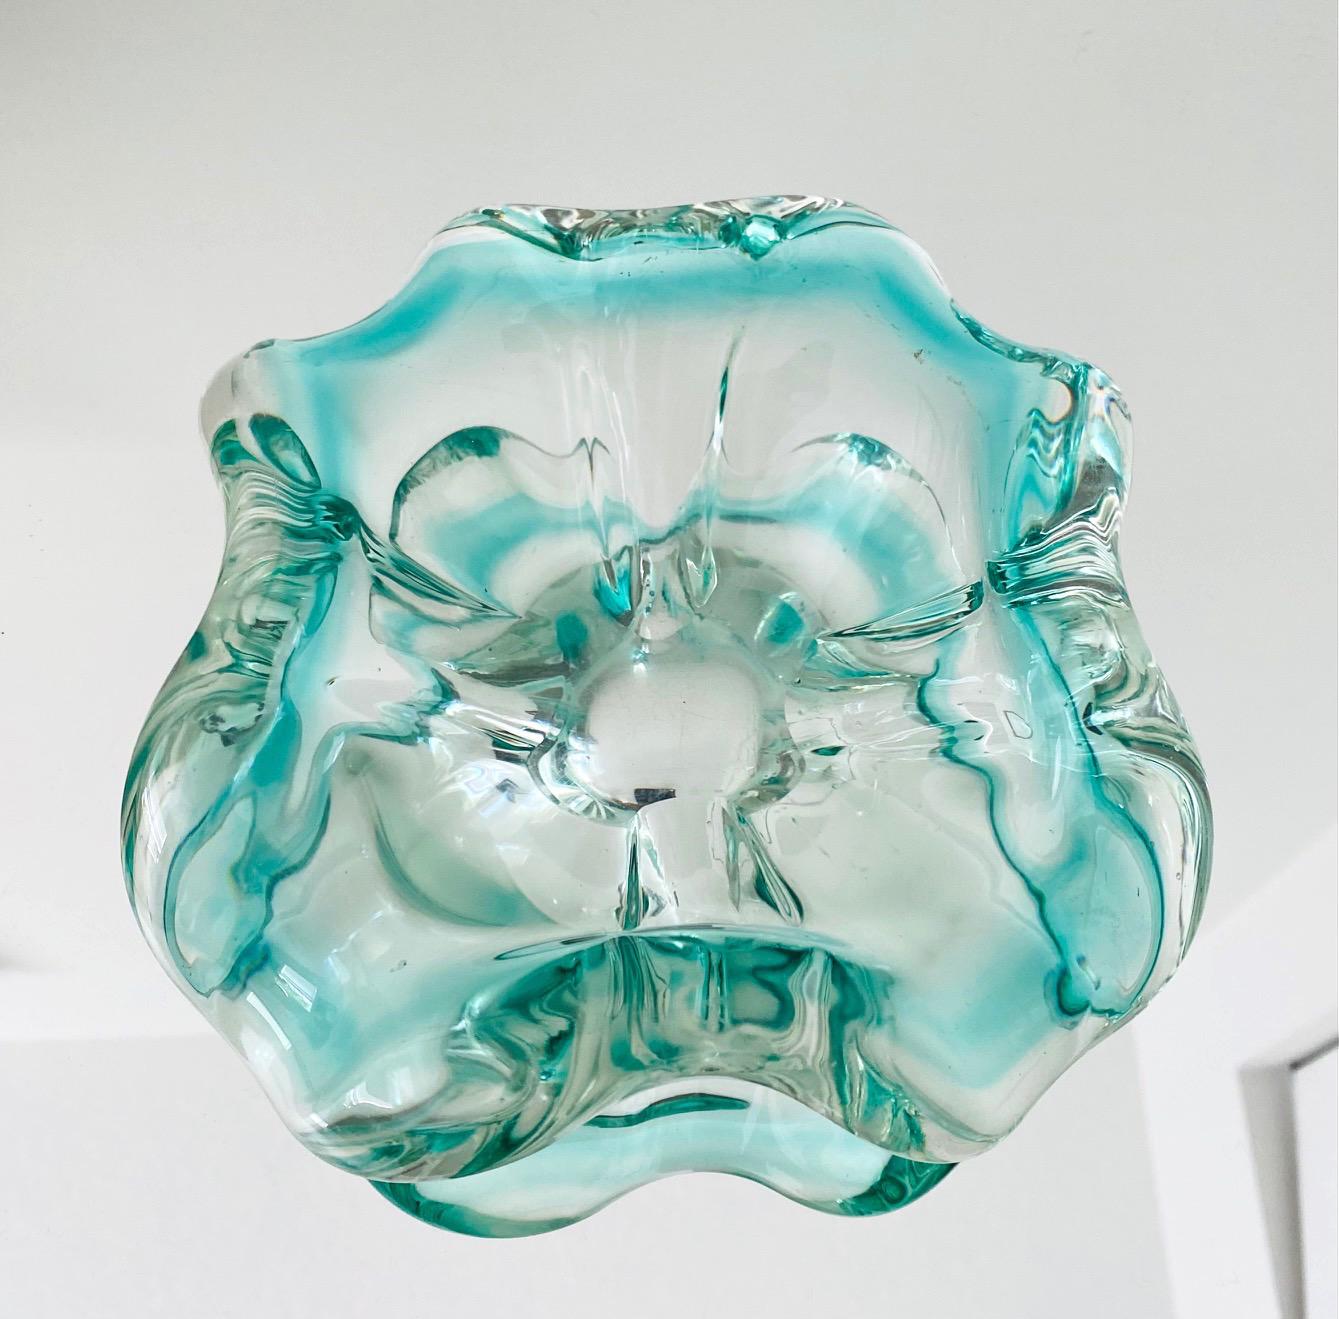 Mid-Century Modern Seguso bowl in handblown murano glass. Large heavy set glass features sommerso technique in aqua and clear glass. The bowl has thick curved rim design with polished edges. Gorgeous from any angle. Can be used as decorative bowl,